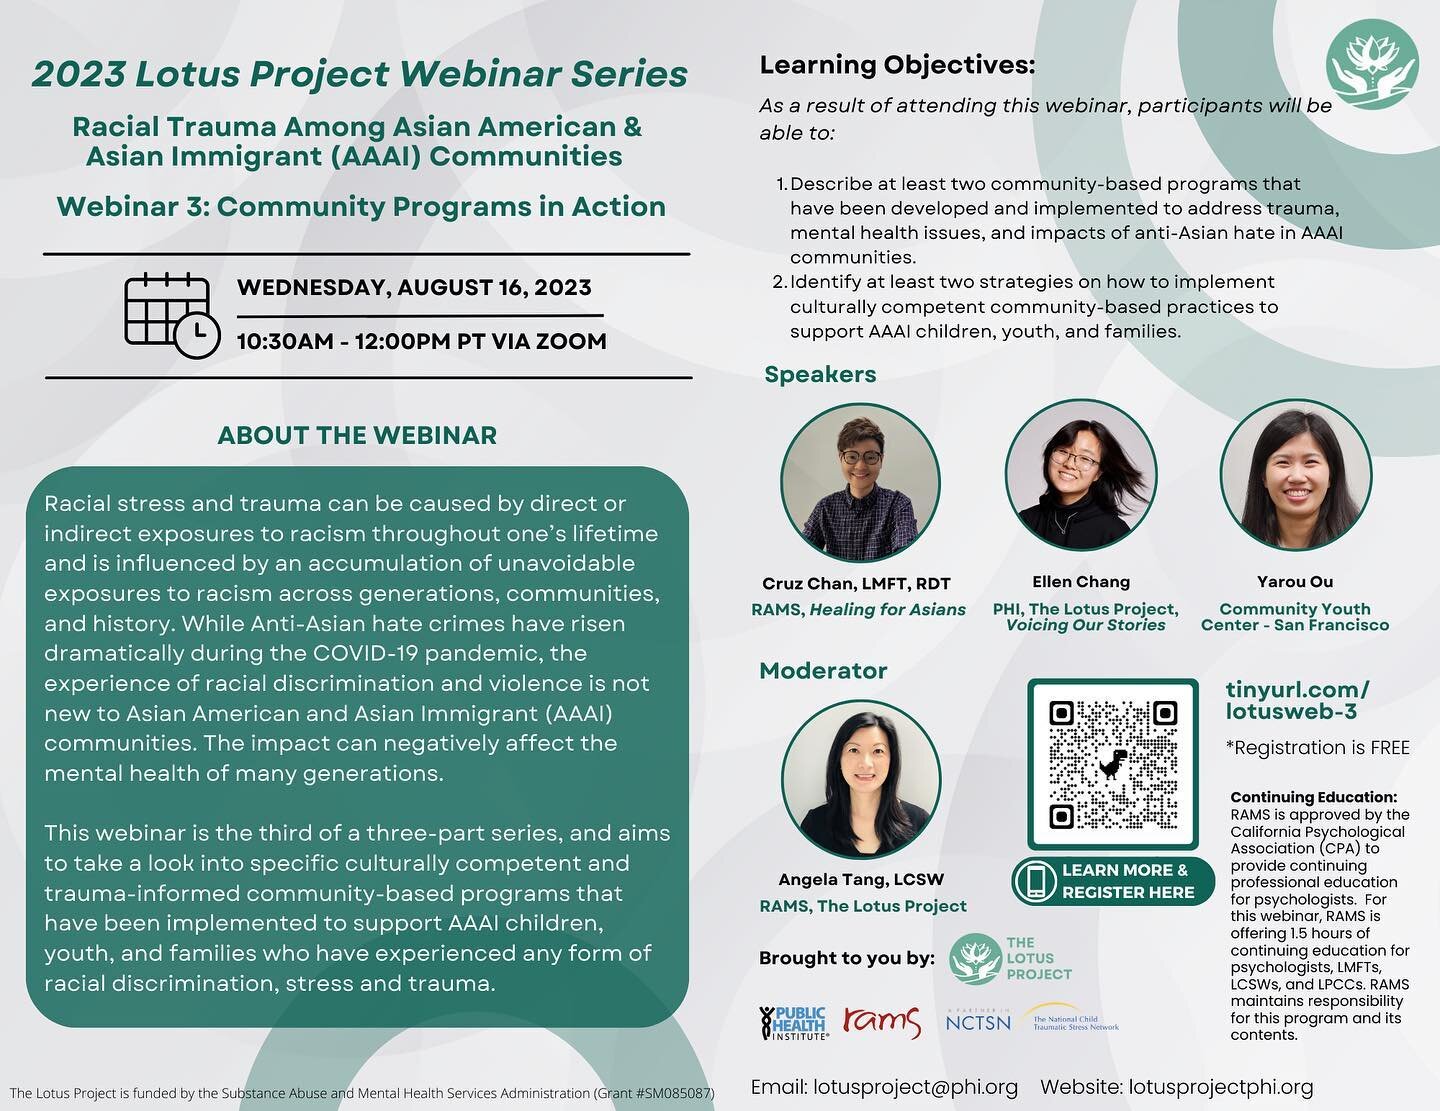 The Lotus Project is excited to present the last webinar of our 3-part webinar series addressing Racial Trauma Among Asian American &amp; Asian Immigrant (AAAI) Communities. 

Webinar 3: Community Programs in Action will take place on Wednesday, Augu